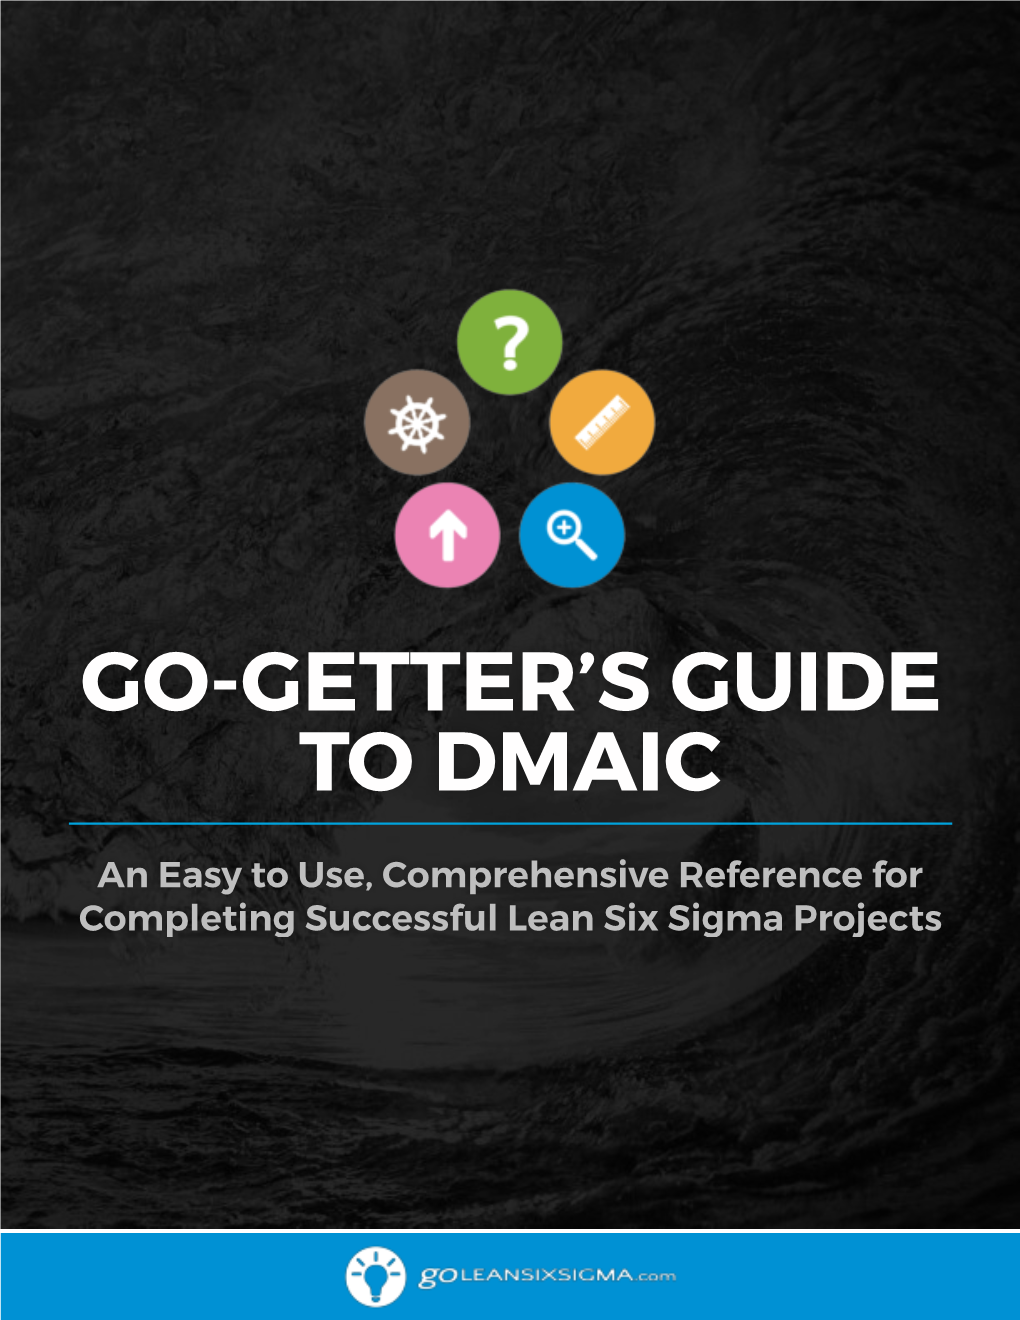 Go-Getter's Guide to DMAIC